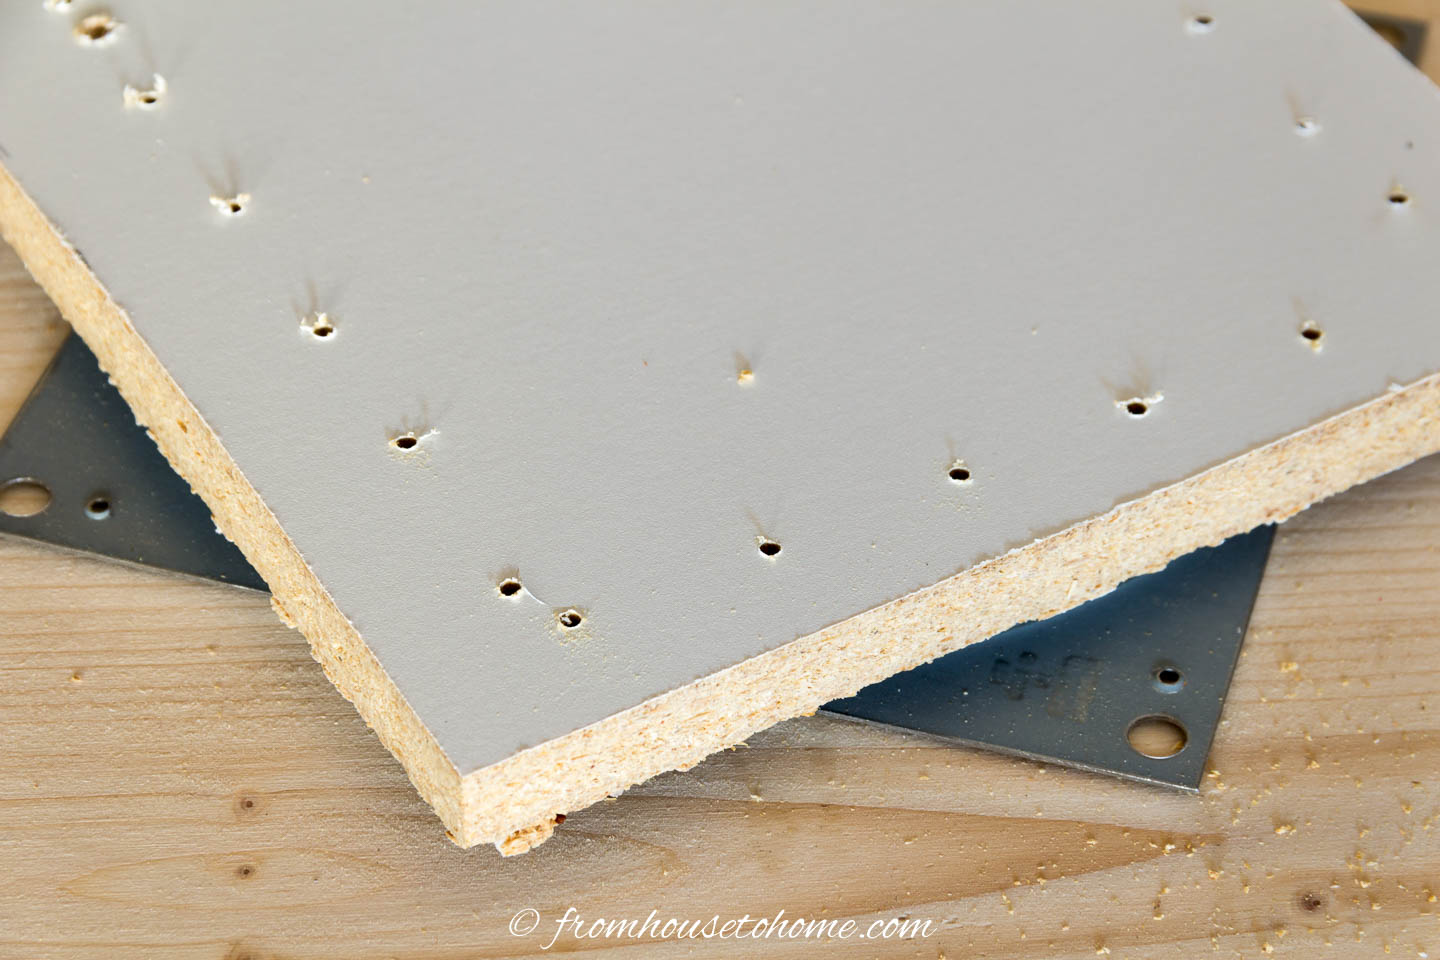 Small melamine board with evenly spaced holes